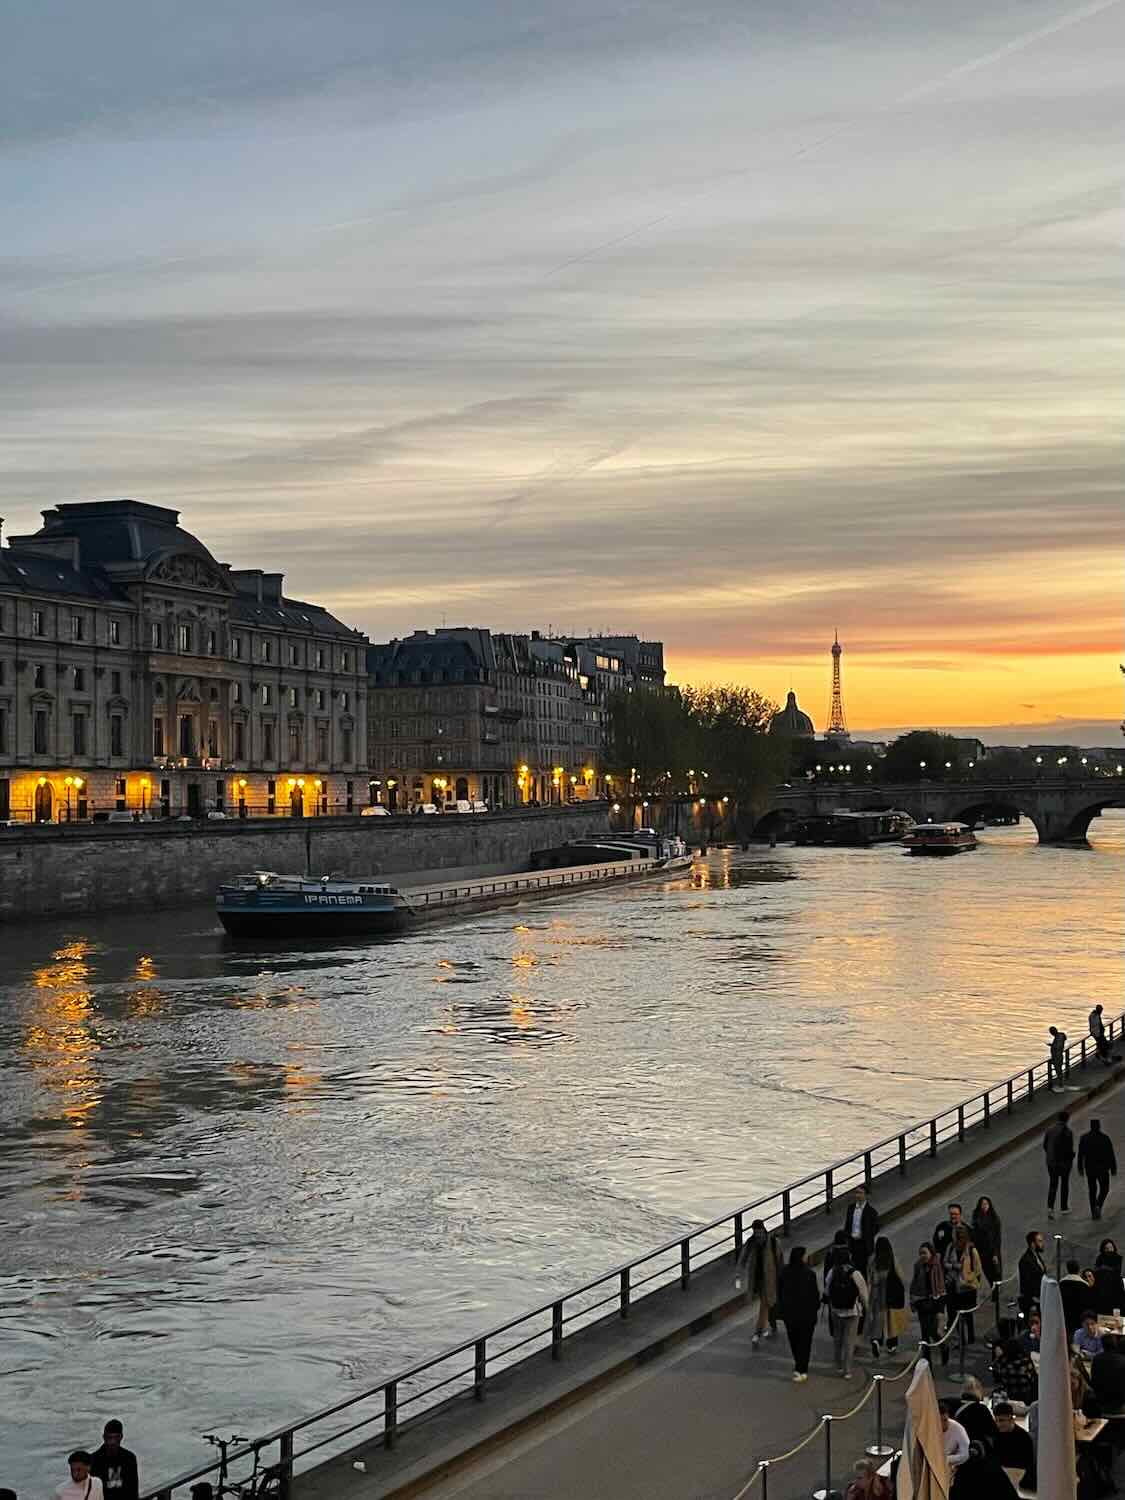 A breathtaking evening view of Paris from a riverside perspective. The sunset casts a warm glow over the city, illuminating the Seine River and the silhouettes of historical buildings. The Eiffel Tower in the distance is lit up, providing a striking contrast against the twilight sky, capturing the romantic essence of Paris at night.